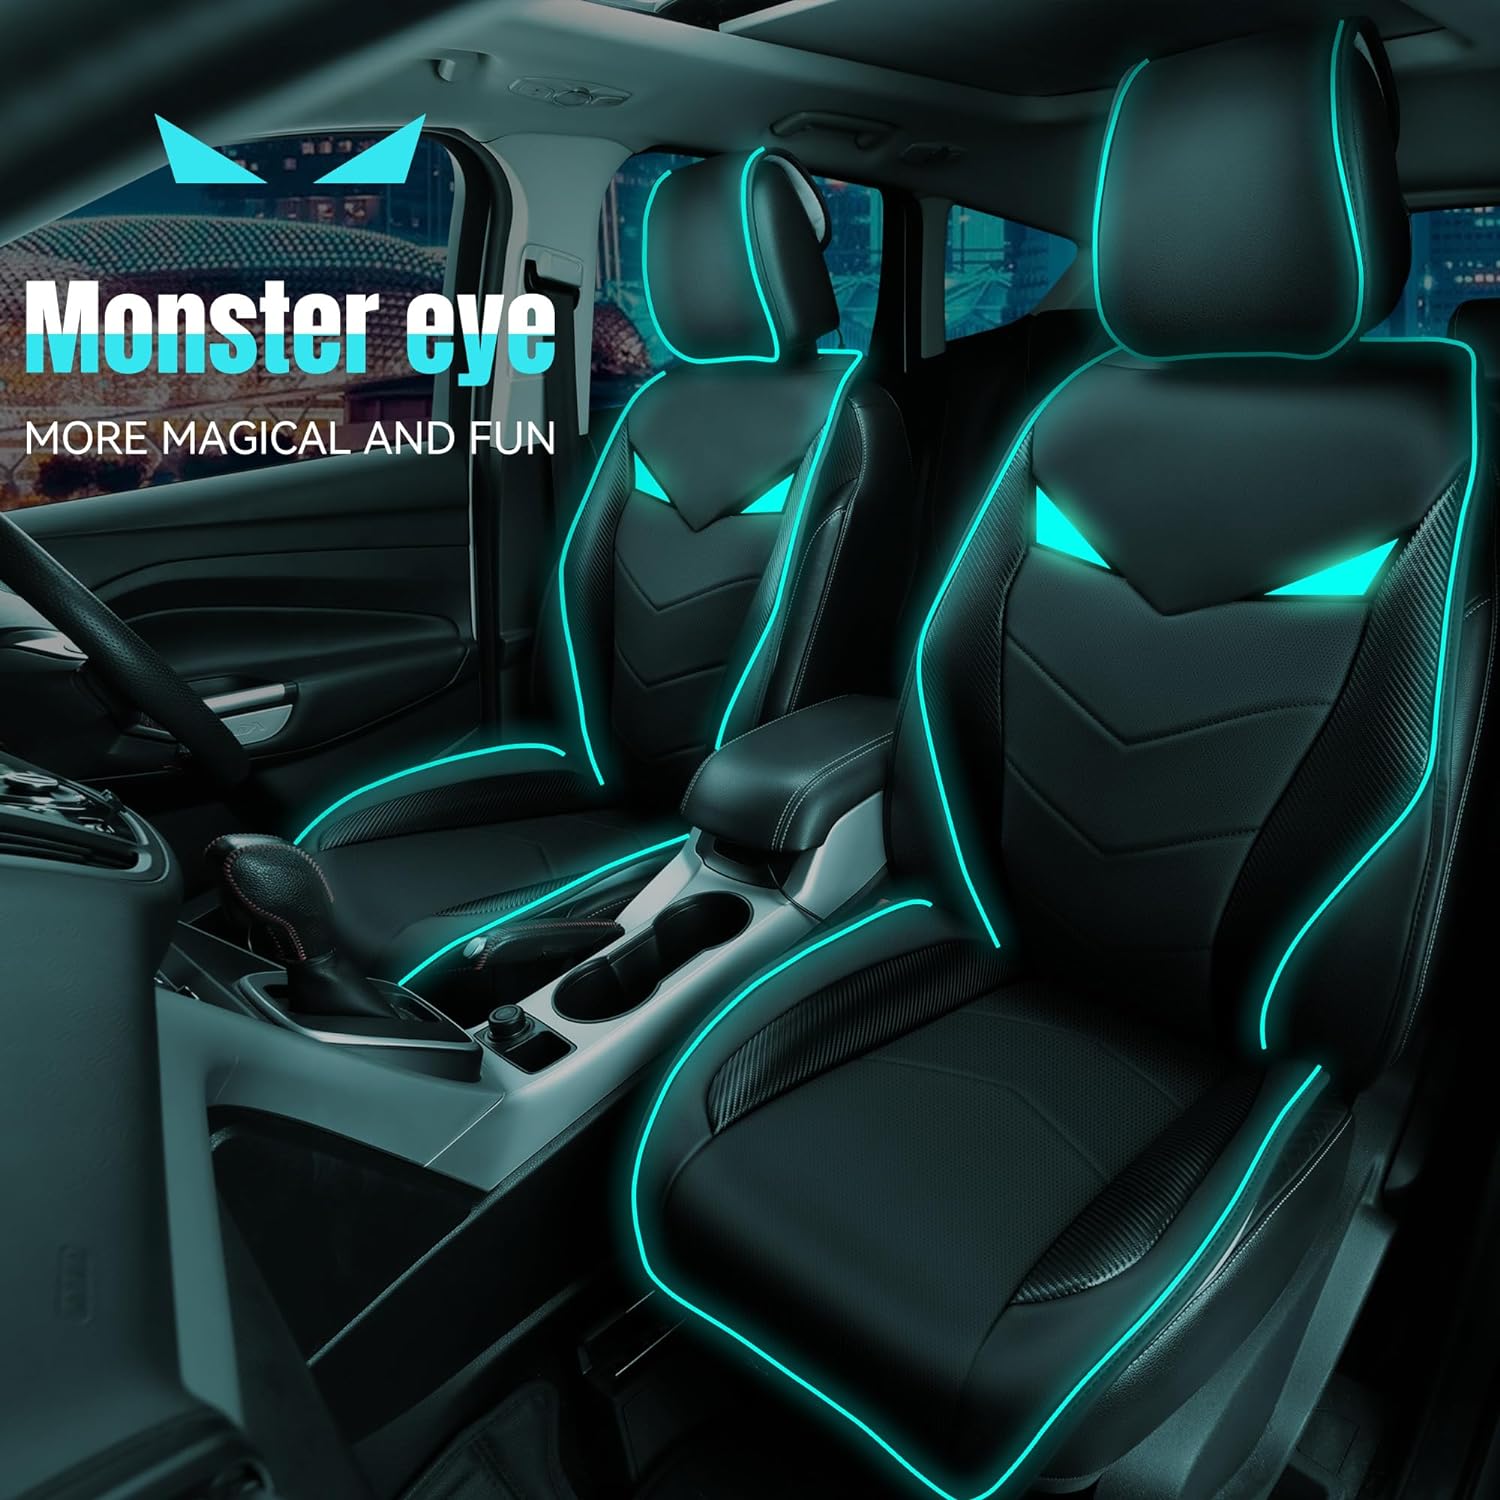 CAR PASS Leather Two Front Seat Covers with Led Light,Sound-Activated Music Sync Little Monster Eye Lighting Front Seat Cover Only Universal Fit for Sedans SUVs Vans,Airbag Compatiable(Black and Mint)